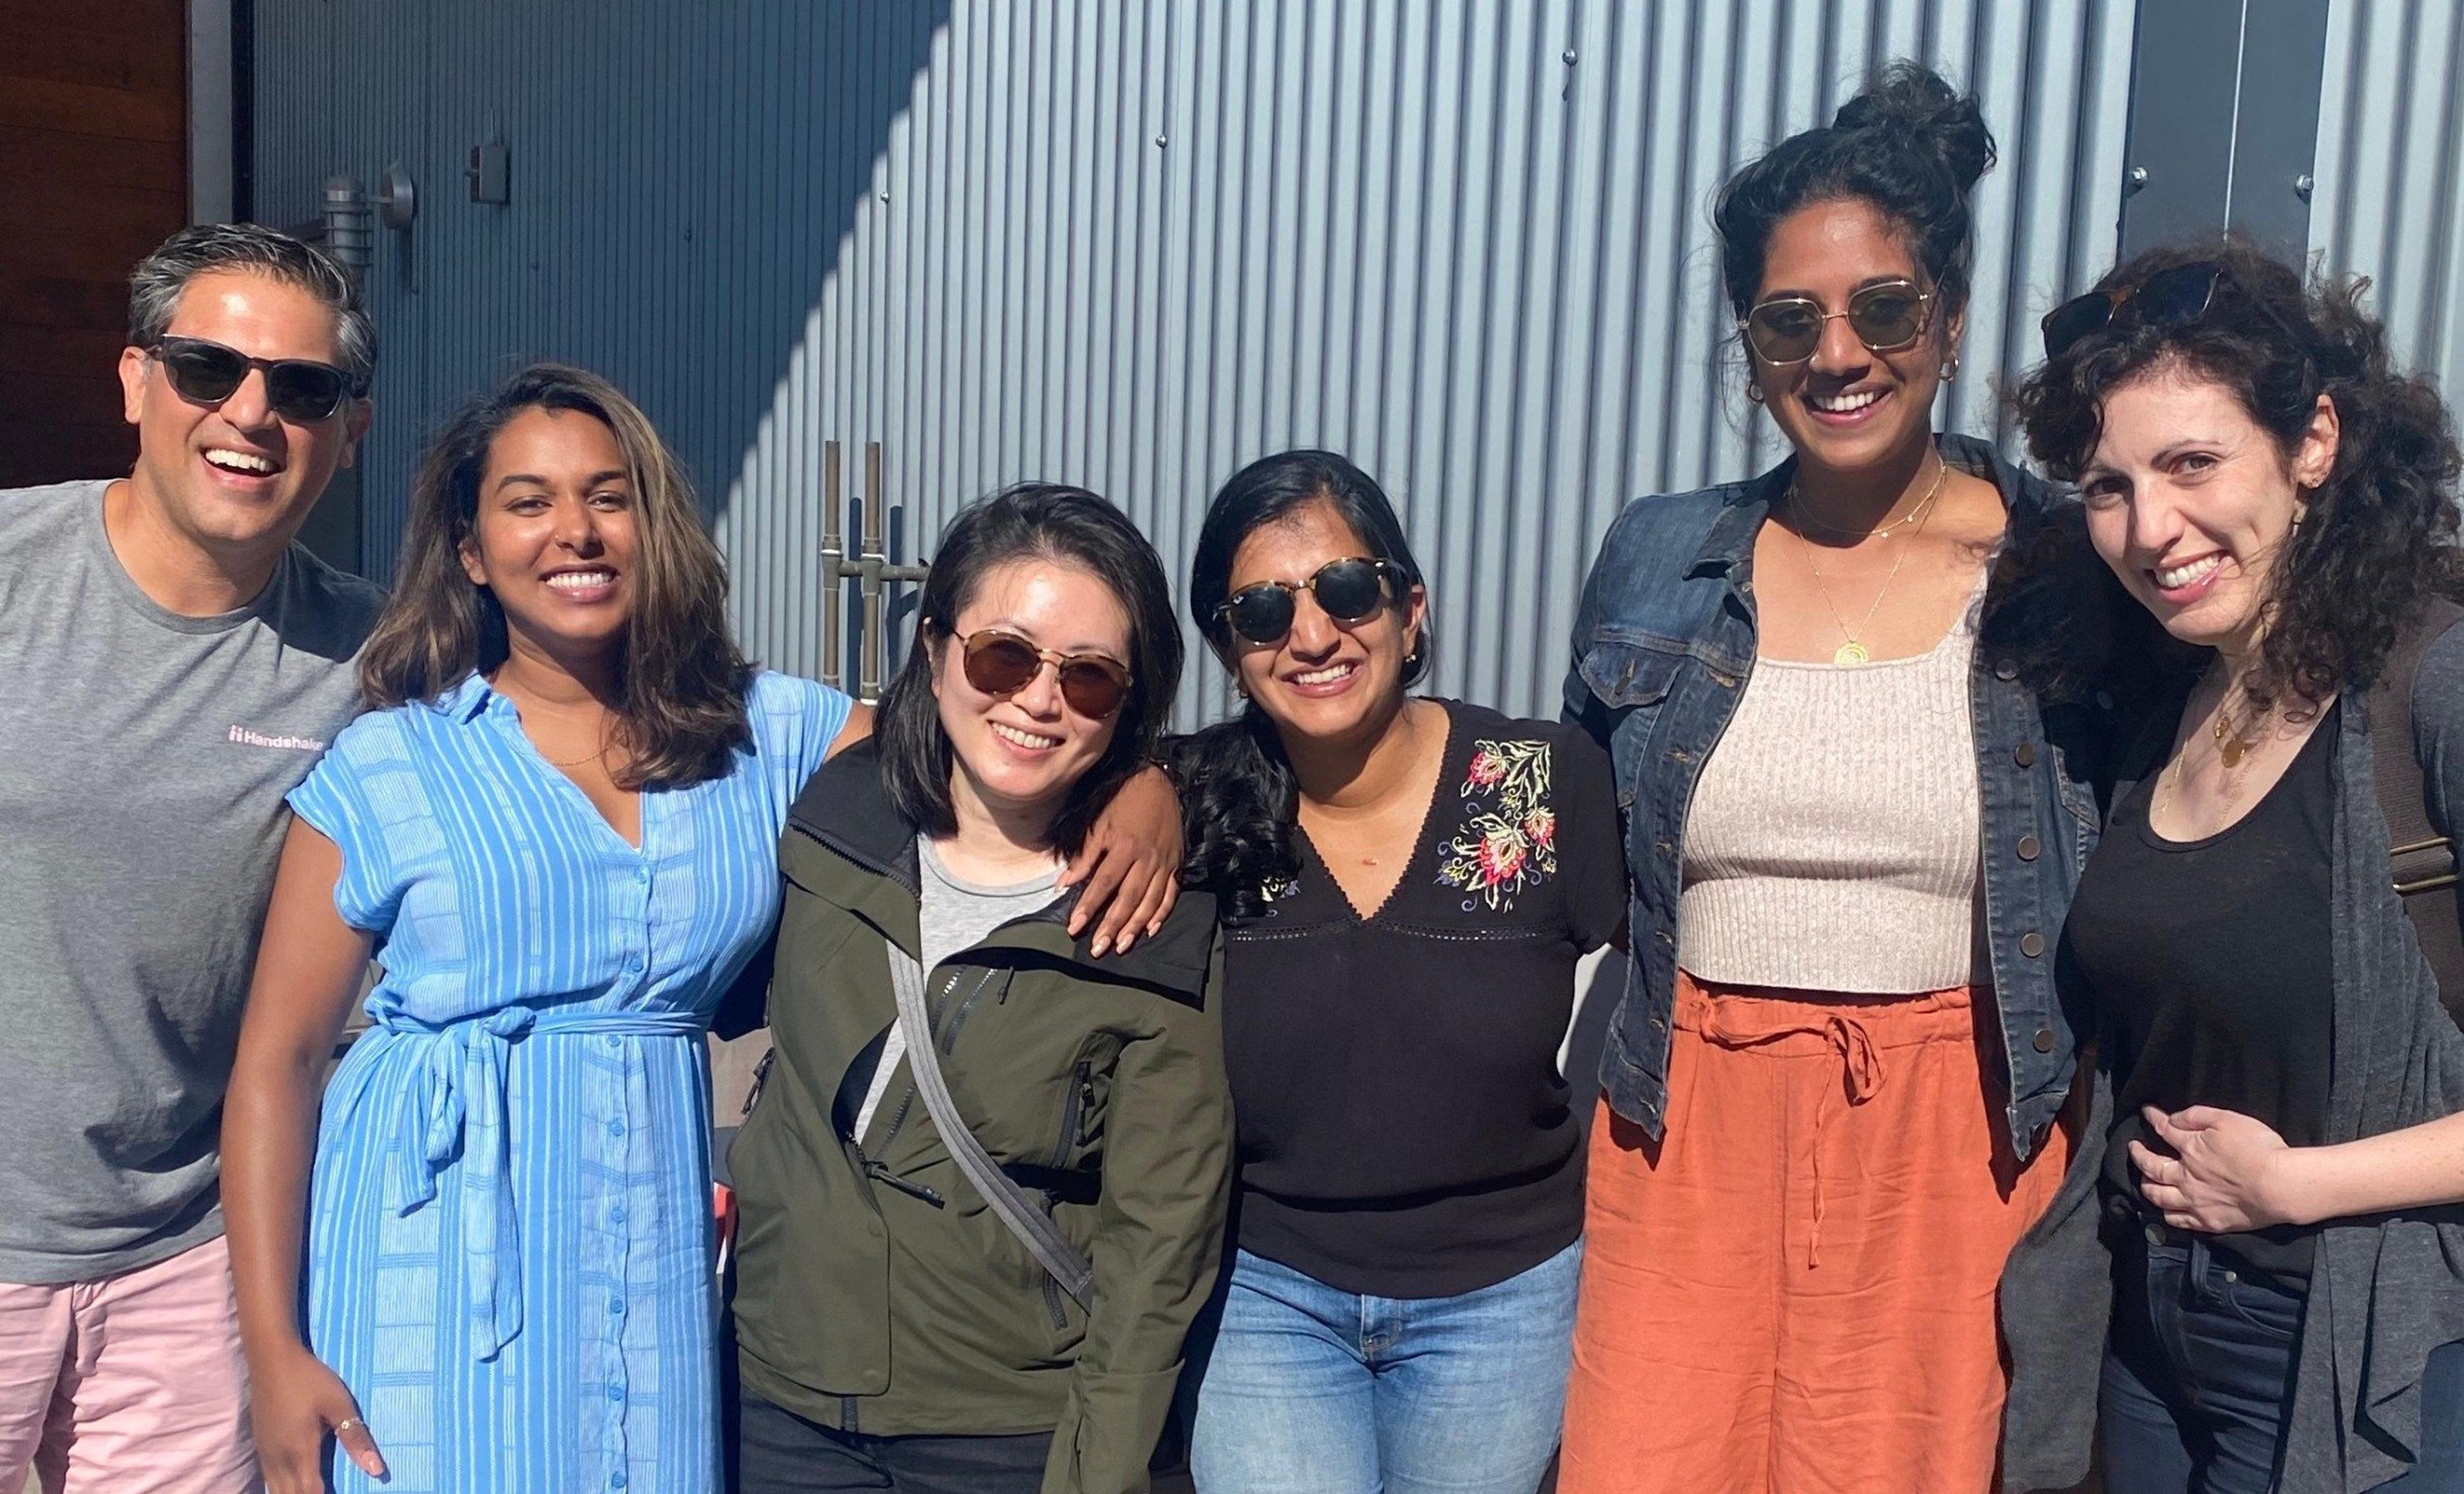 Sharda (second from the left) enjoying the outdoors and sunshine with her fellow Handshake colleagues. 